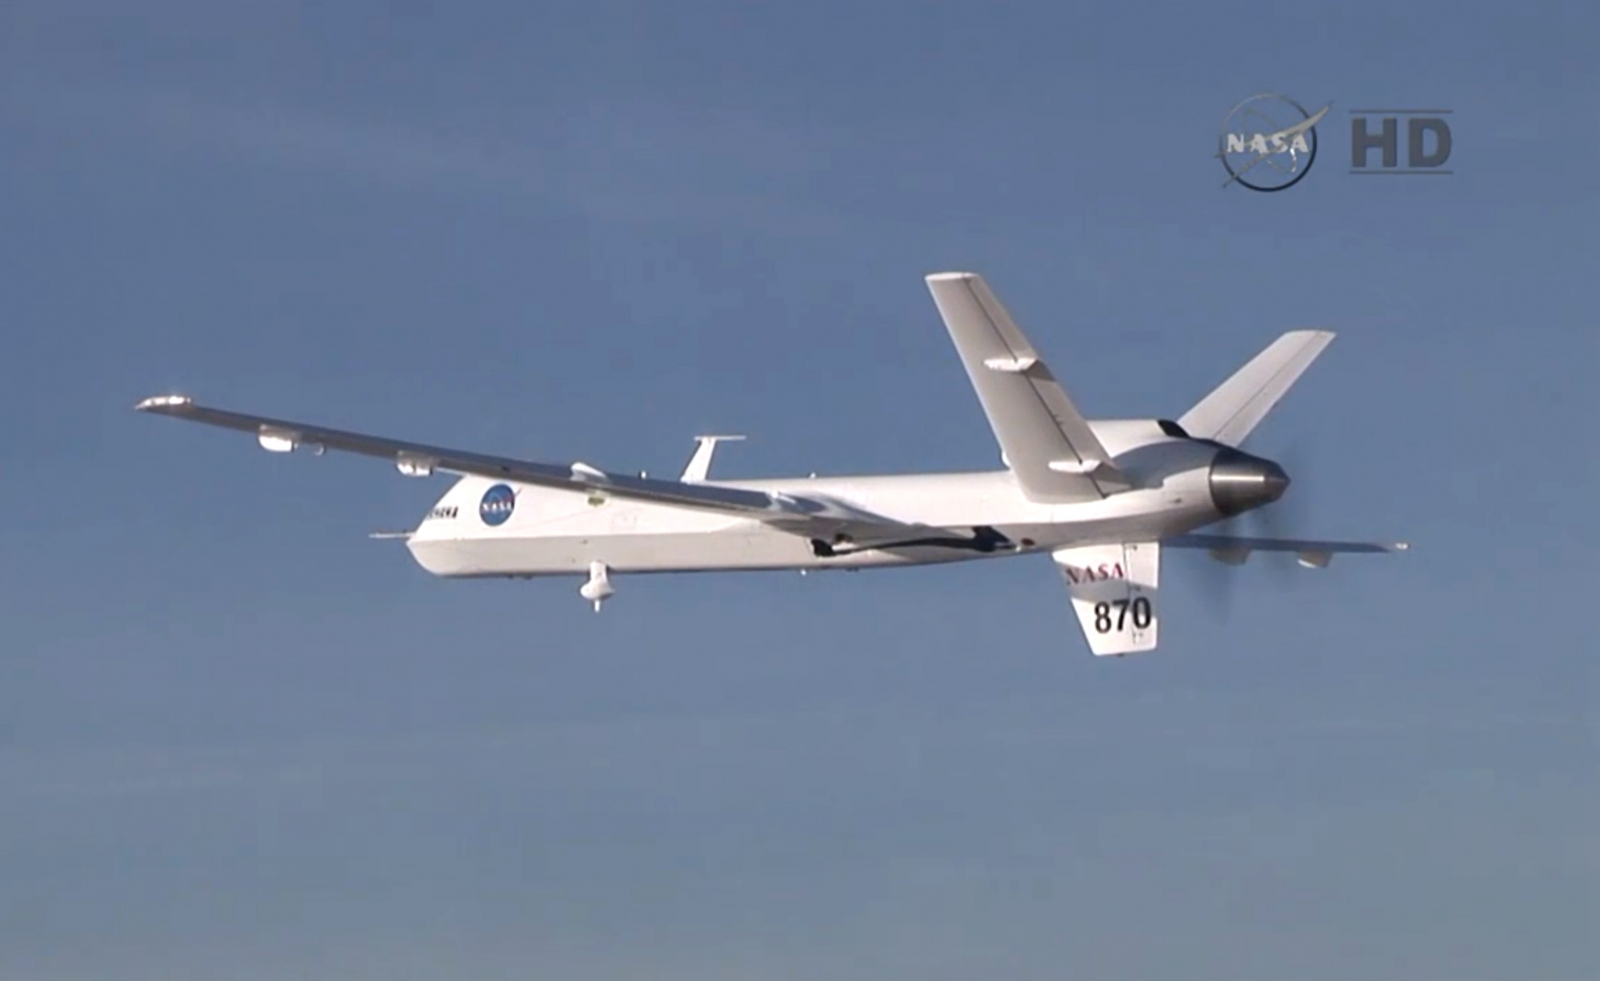 Nasas Ikhana unmanned aerial vehicle that took video footage from the air over the Pacific ocean